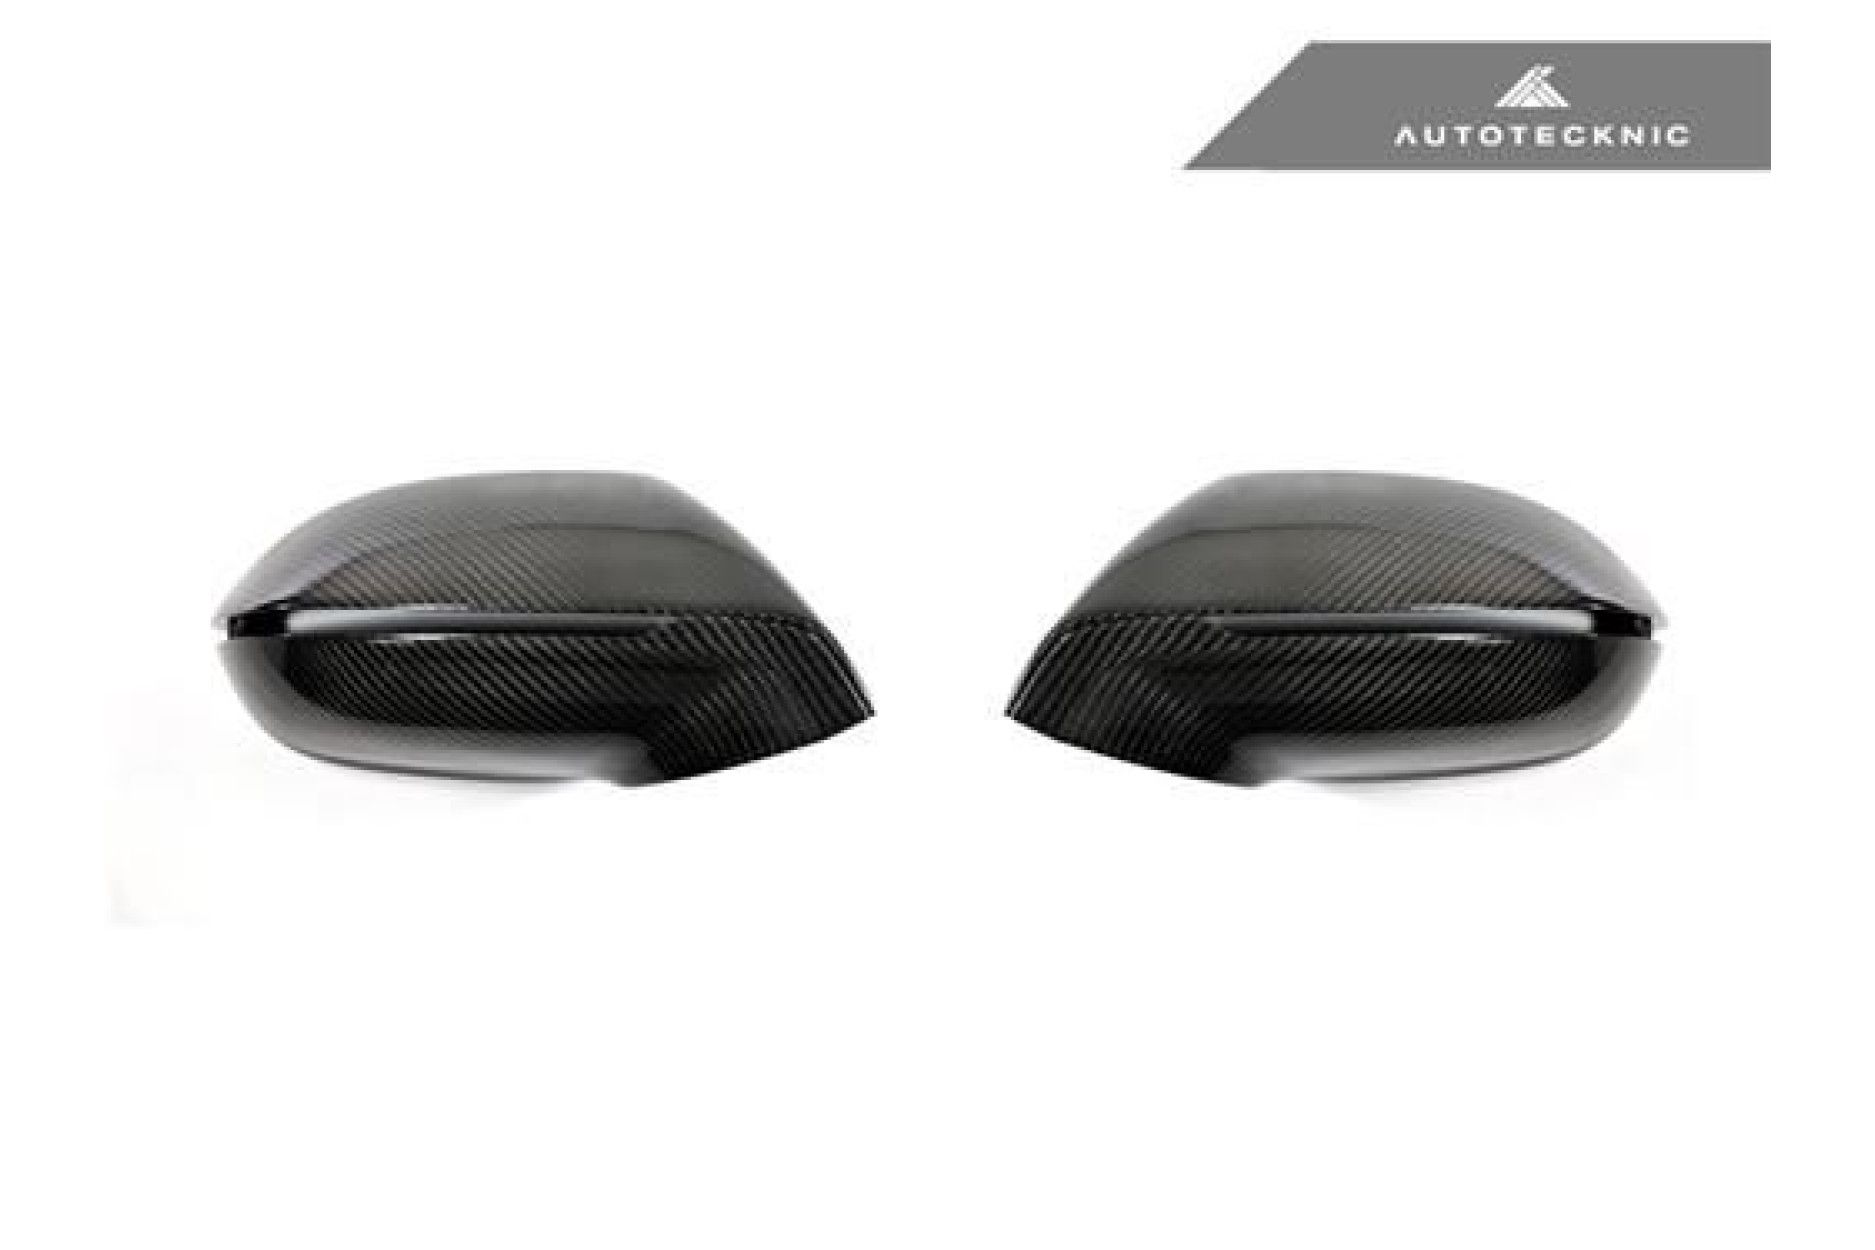 AutoTecknic Replacement Carbon Fiber Mirror Covers - Audi A7 S7 RS7 2012-Up without Side Assist